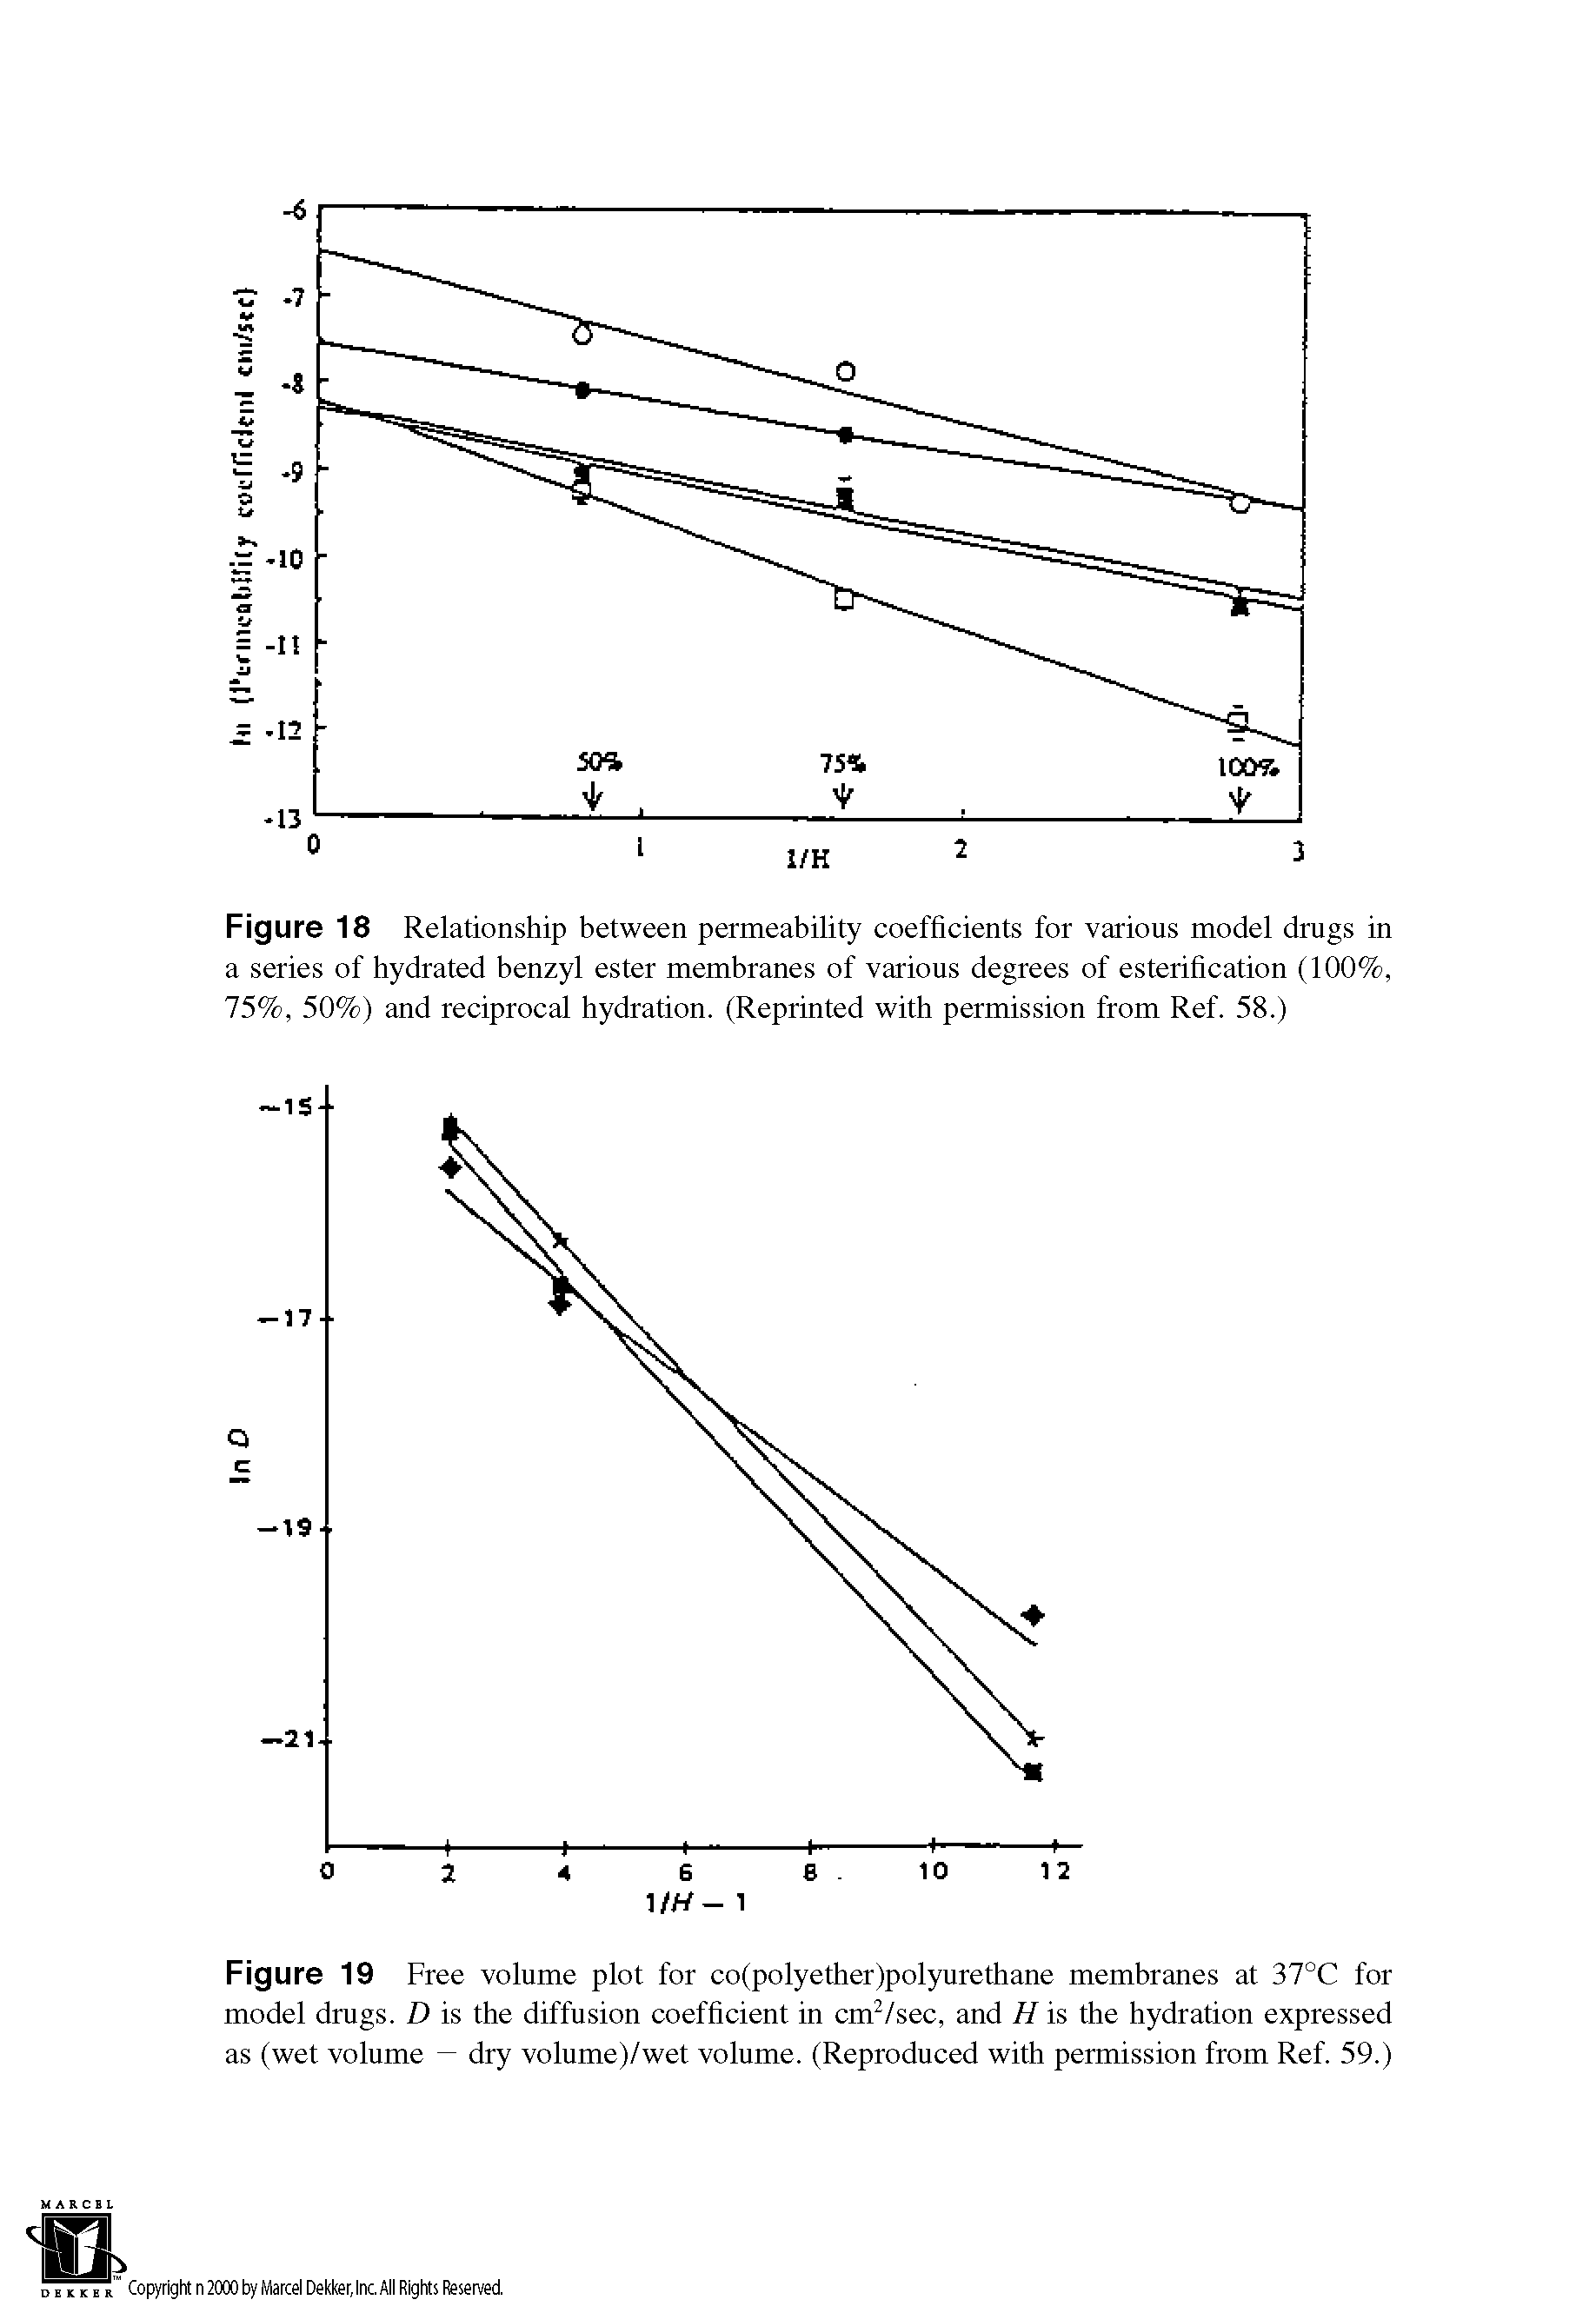 Figure 19 Free volume plot for co(polyether)polyurethane membranes at 37°C for model drugs. D is the diffusion coefficient in cm2/sec, and H is the hydration expressed as (wet volume — dry volume)/wet volume. (Reproduced with permission from Ref. 59.)...